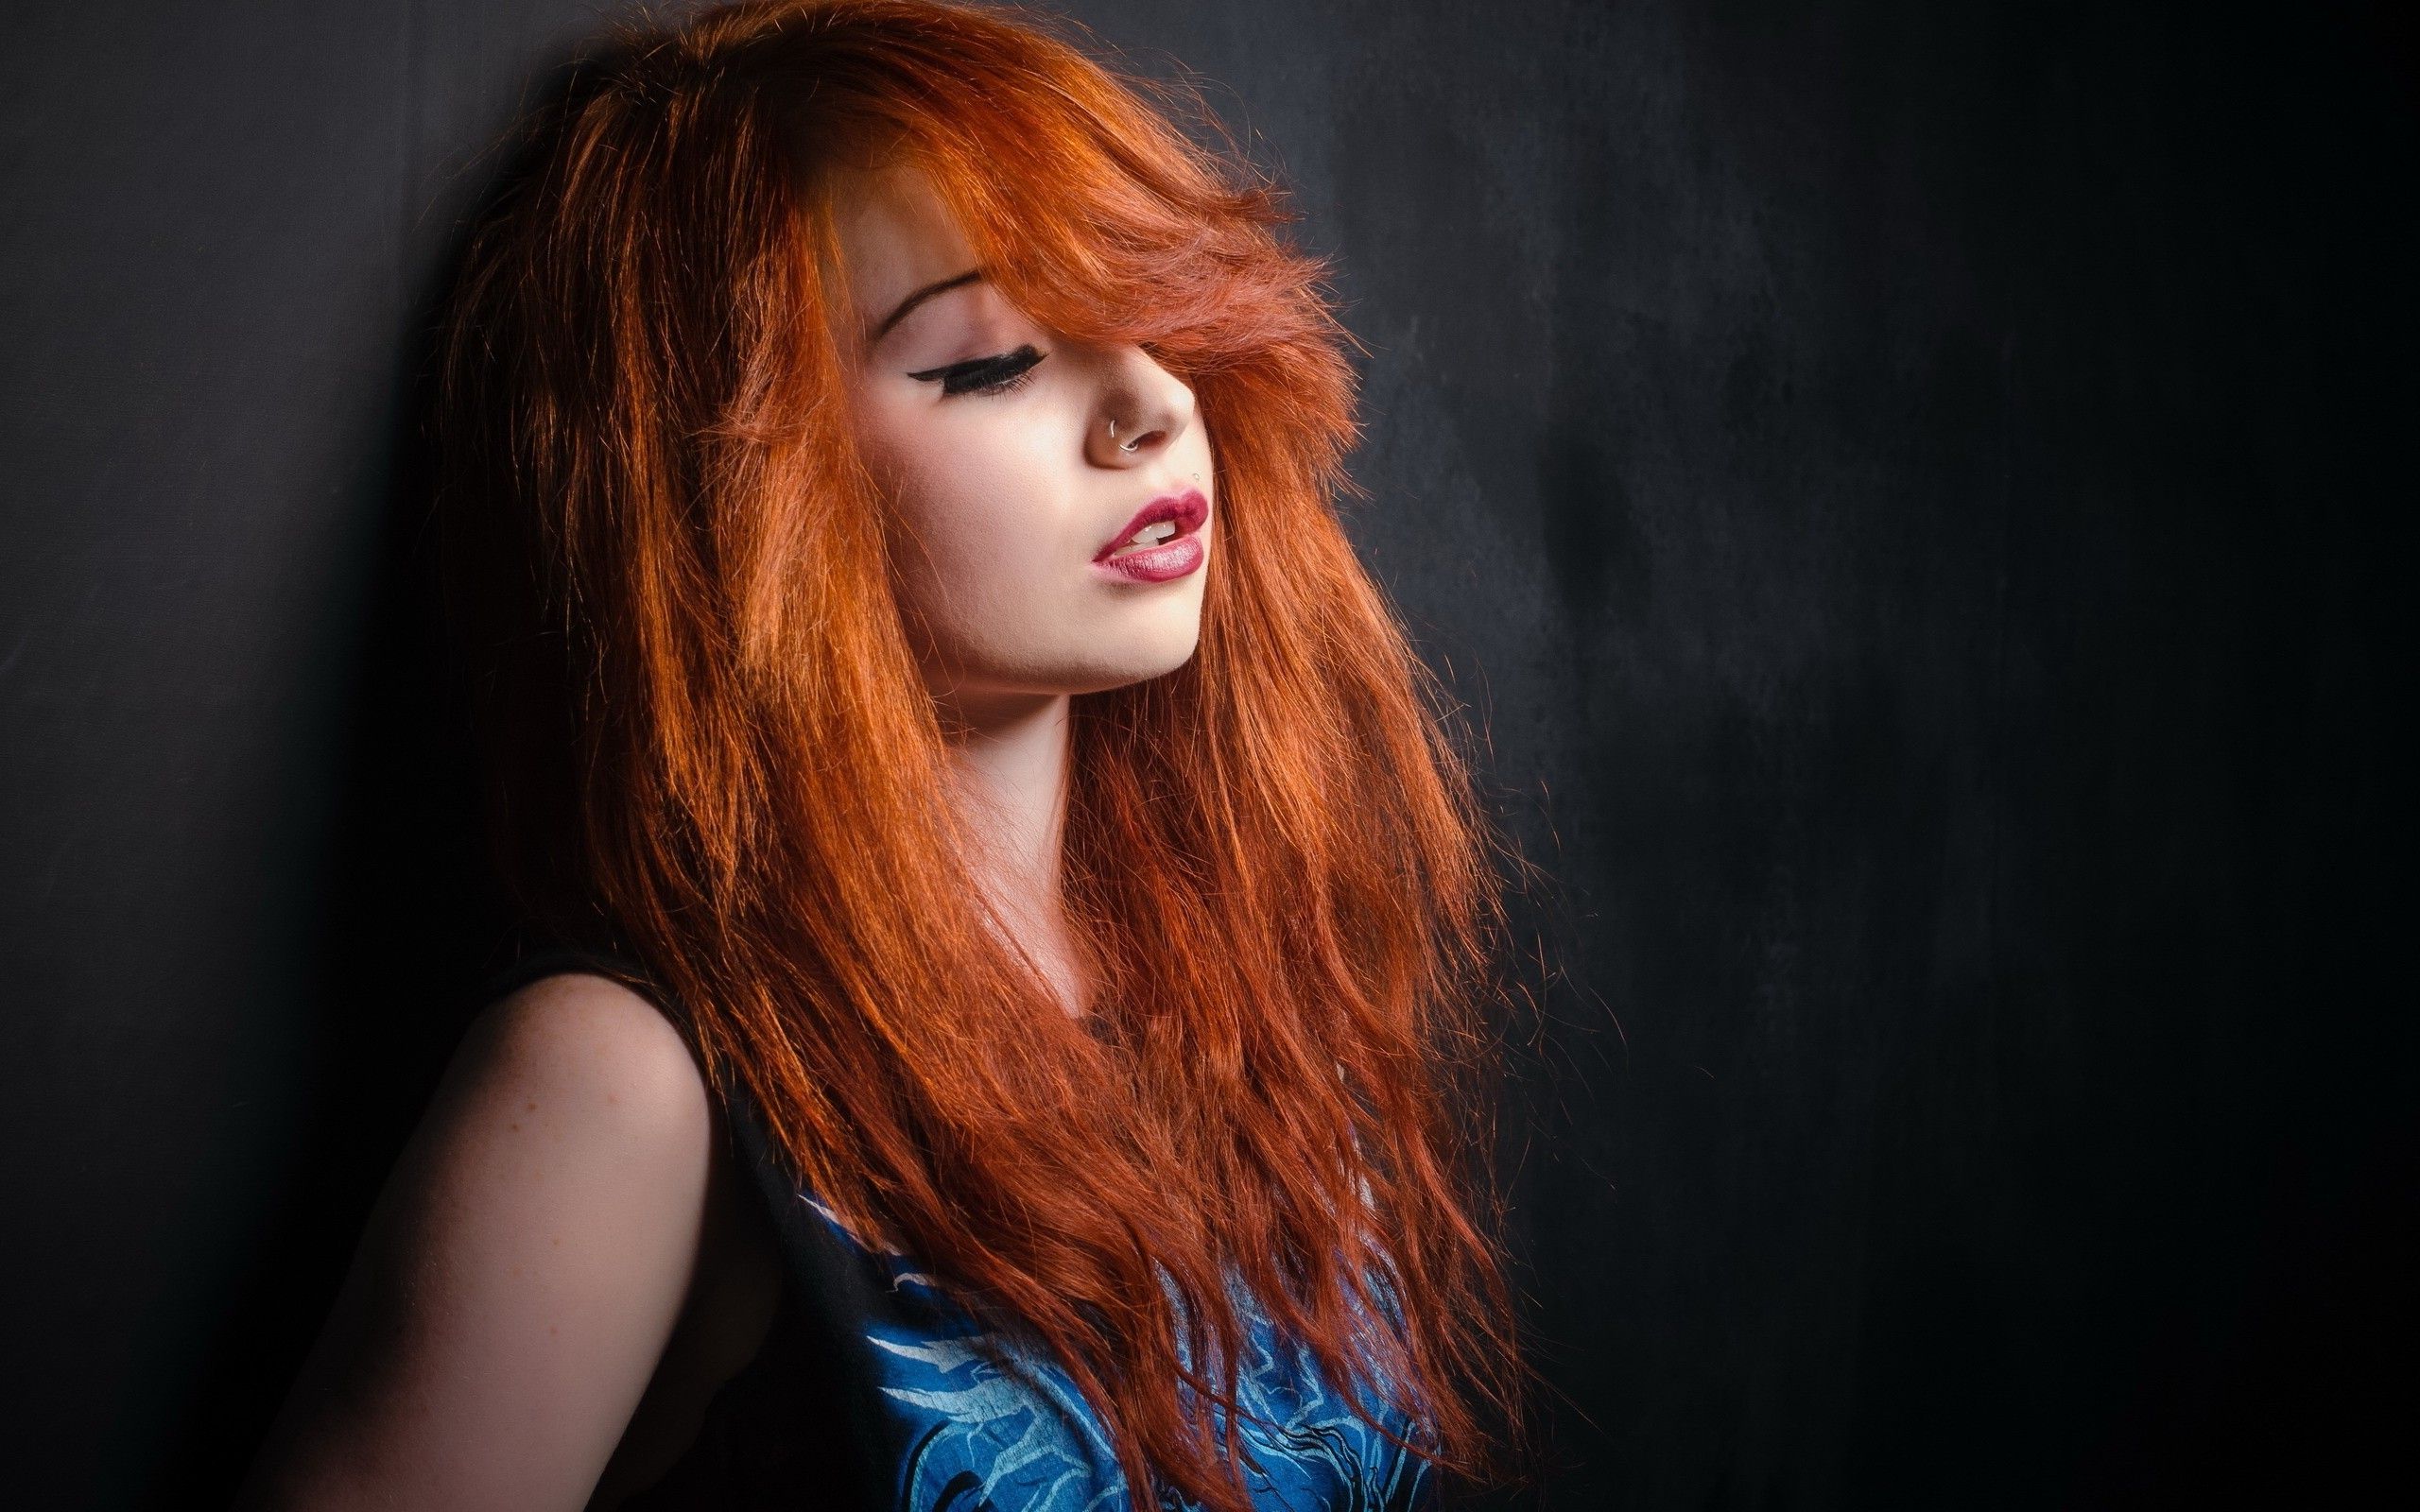 Wallpaper, people, model, long hair, singer, fashion, singing, girl, beauty, eye, blond, hairstyle, 2560x1600 px, portrait photography, photo shoot, brown hair, human hair color, hair coloring, red hair 2560x1600